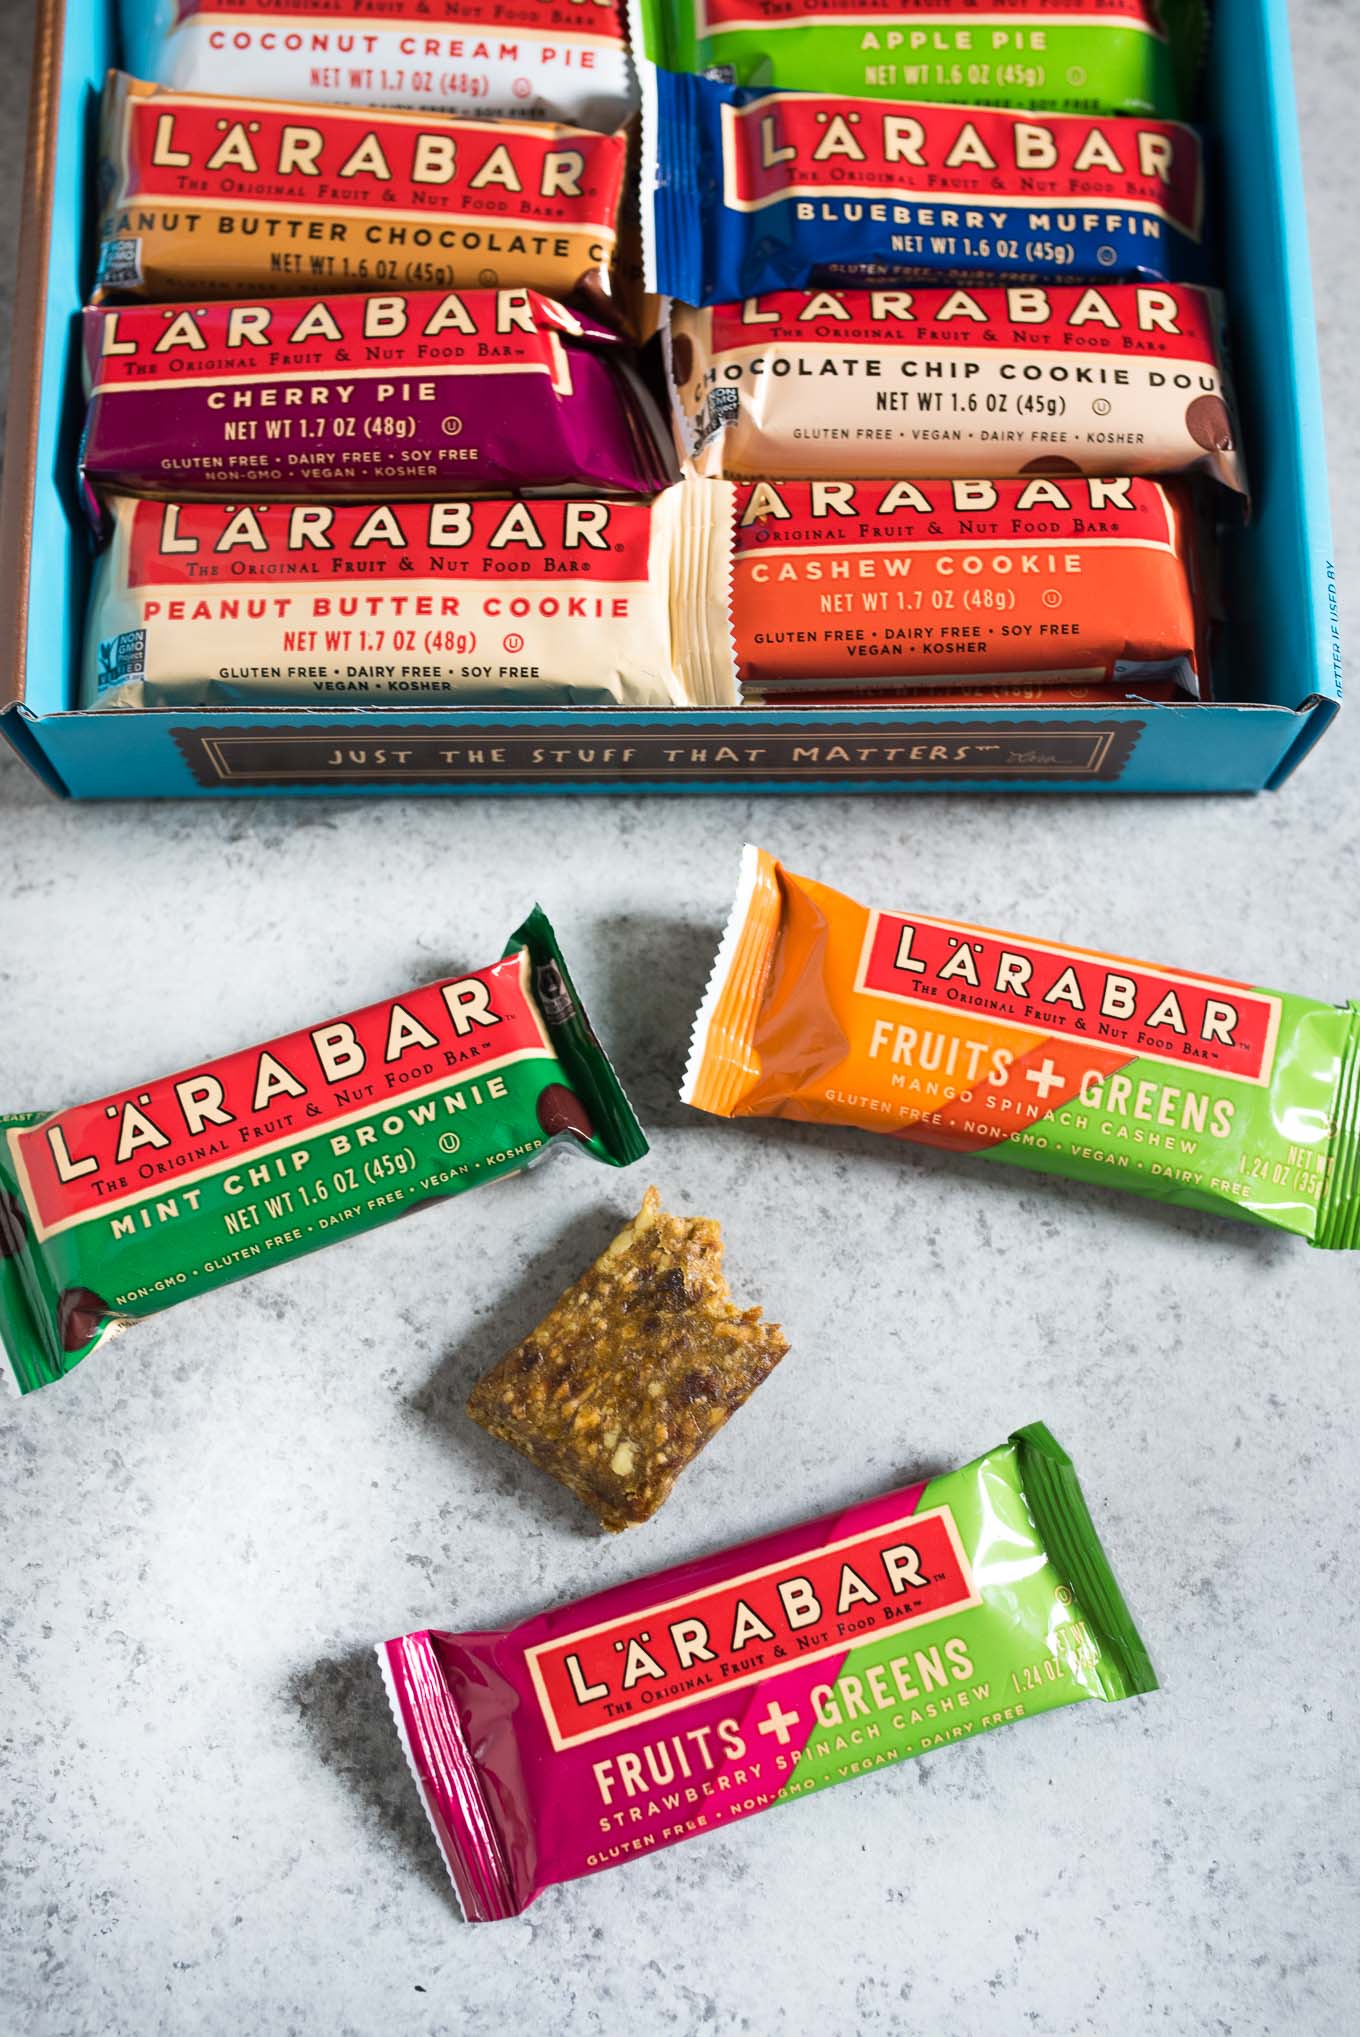 The perfect fruit and nut bar to stock up on- #glutenfree #paleo and #whole30 compliant. Real food in a snack bar form! 25% off through Feb. 14th! #sponsored